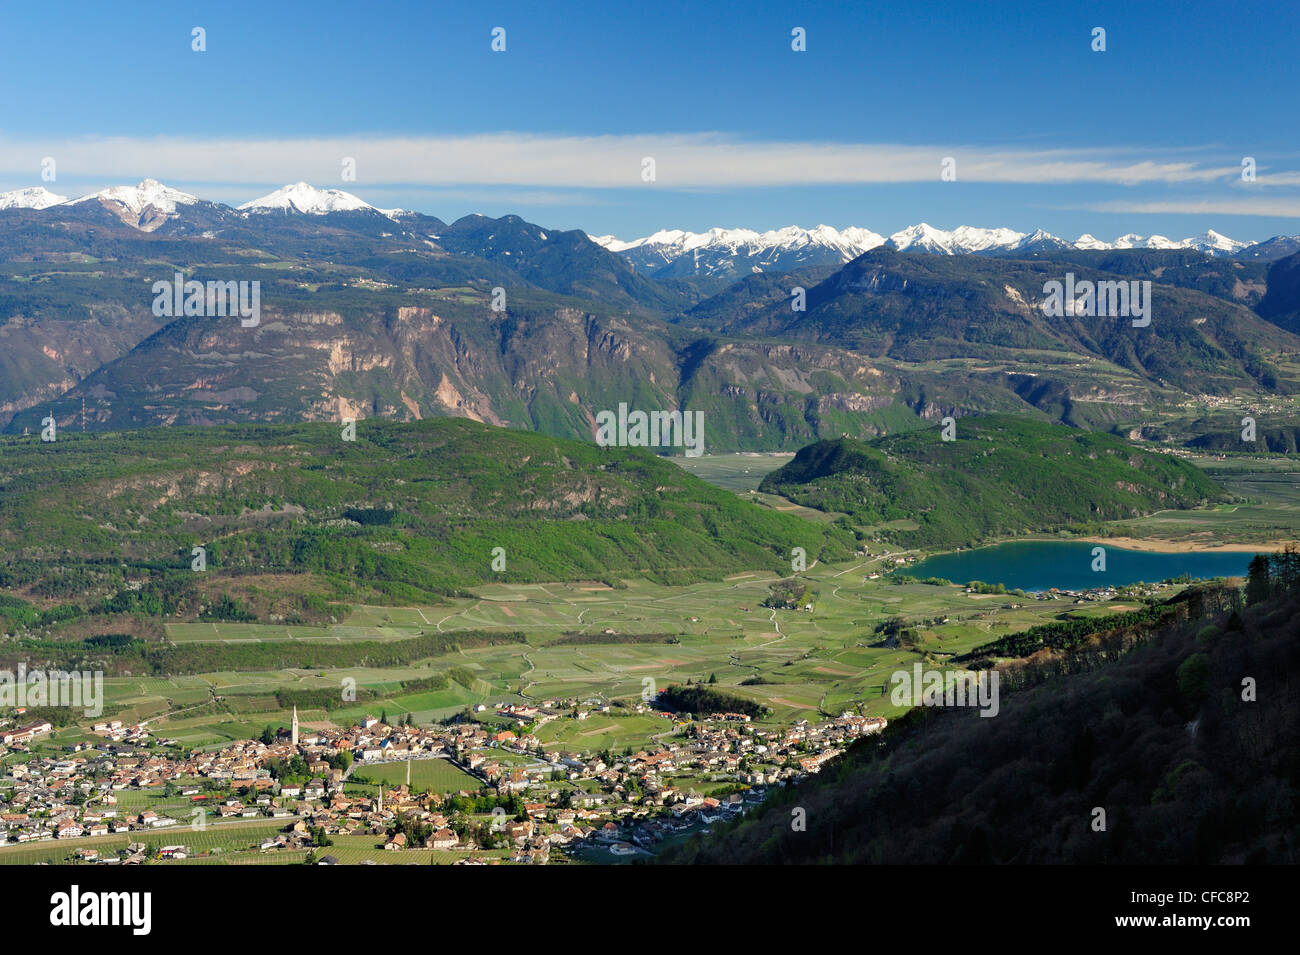 View to Kaltern and Lake Kaltern with valley of Eisack and snow-covered Dolomite Alps in background, Kaltern, South Tyrol, Italy Stock Photo